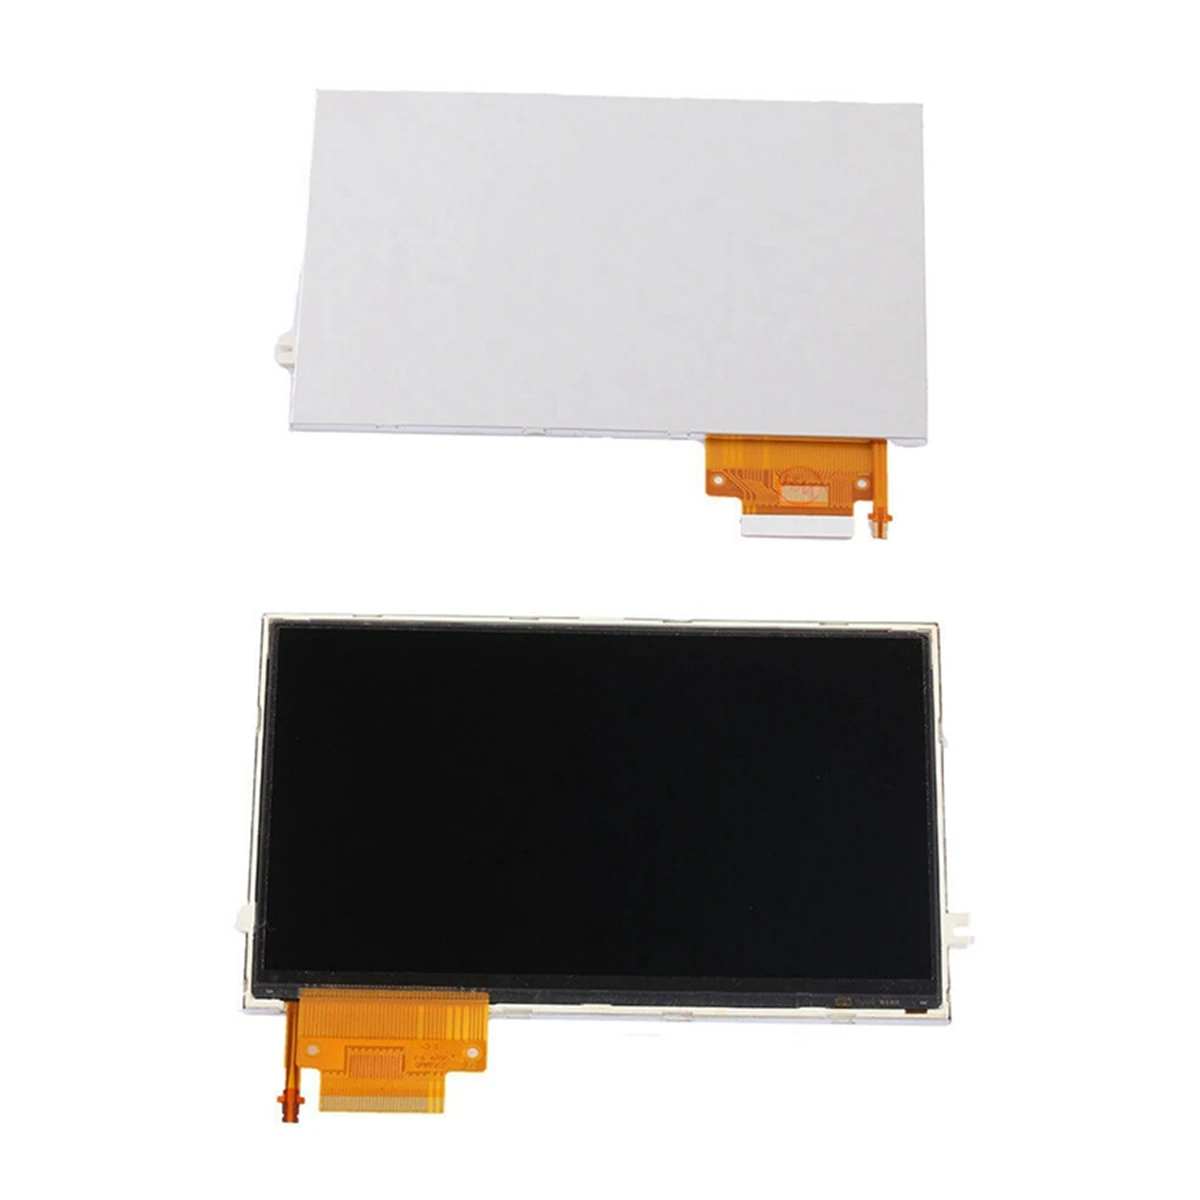 Retail LCD Screen Display Backlight Replacement for Sony PSP 2000/2001/2003/2004 Series